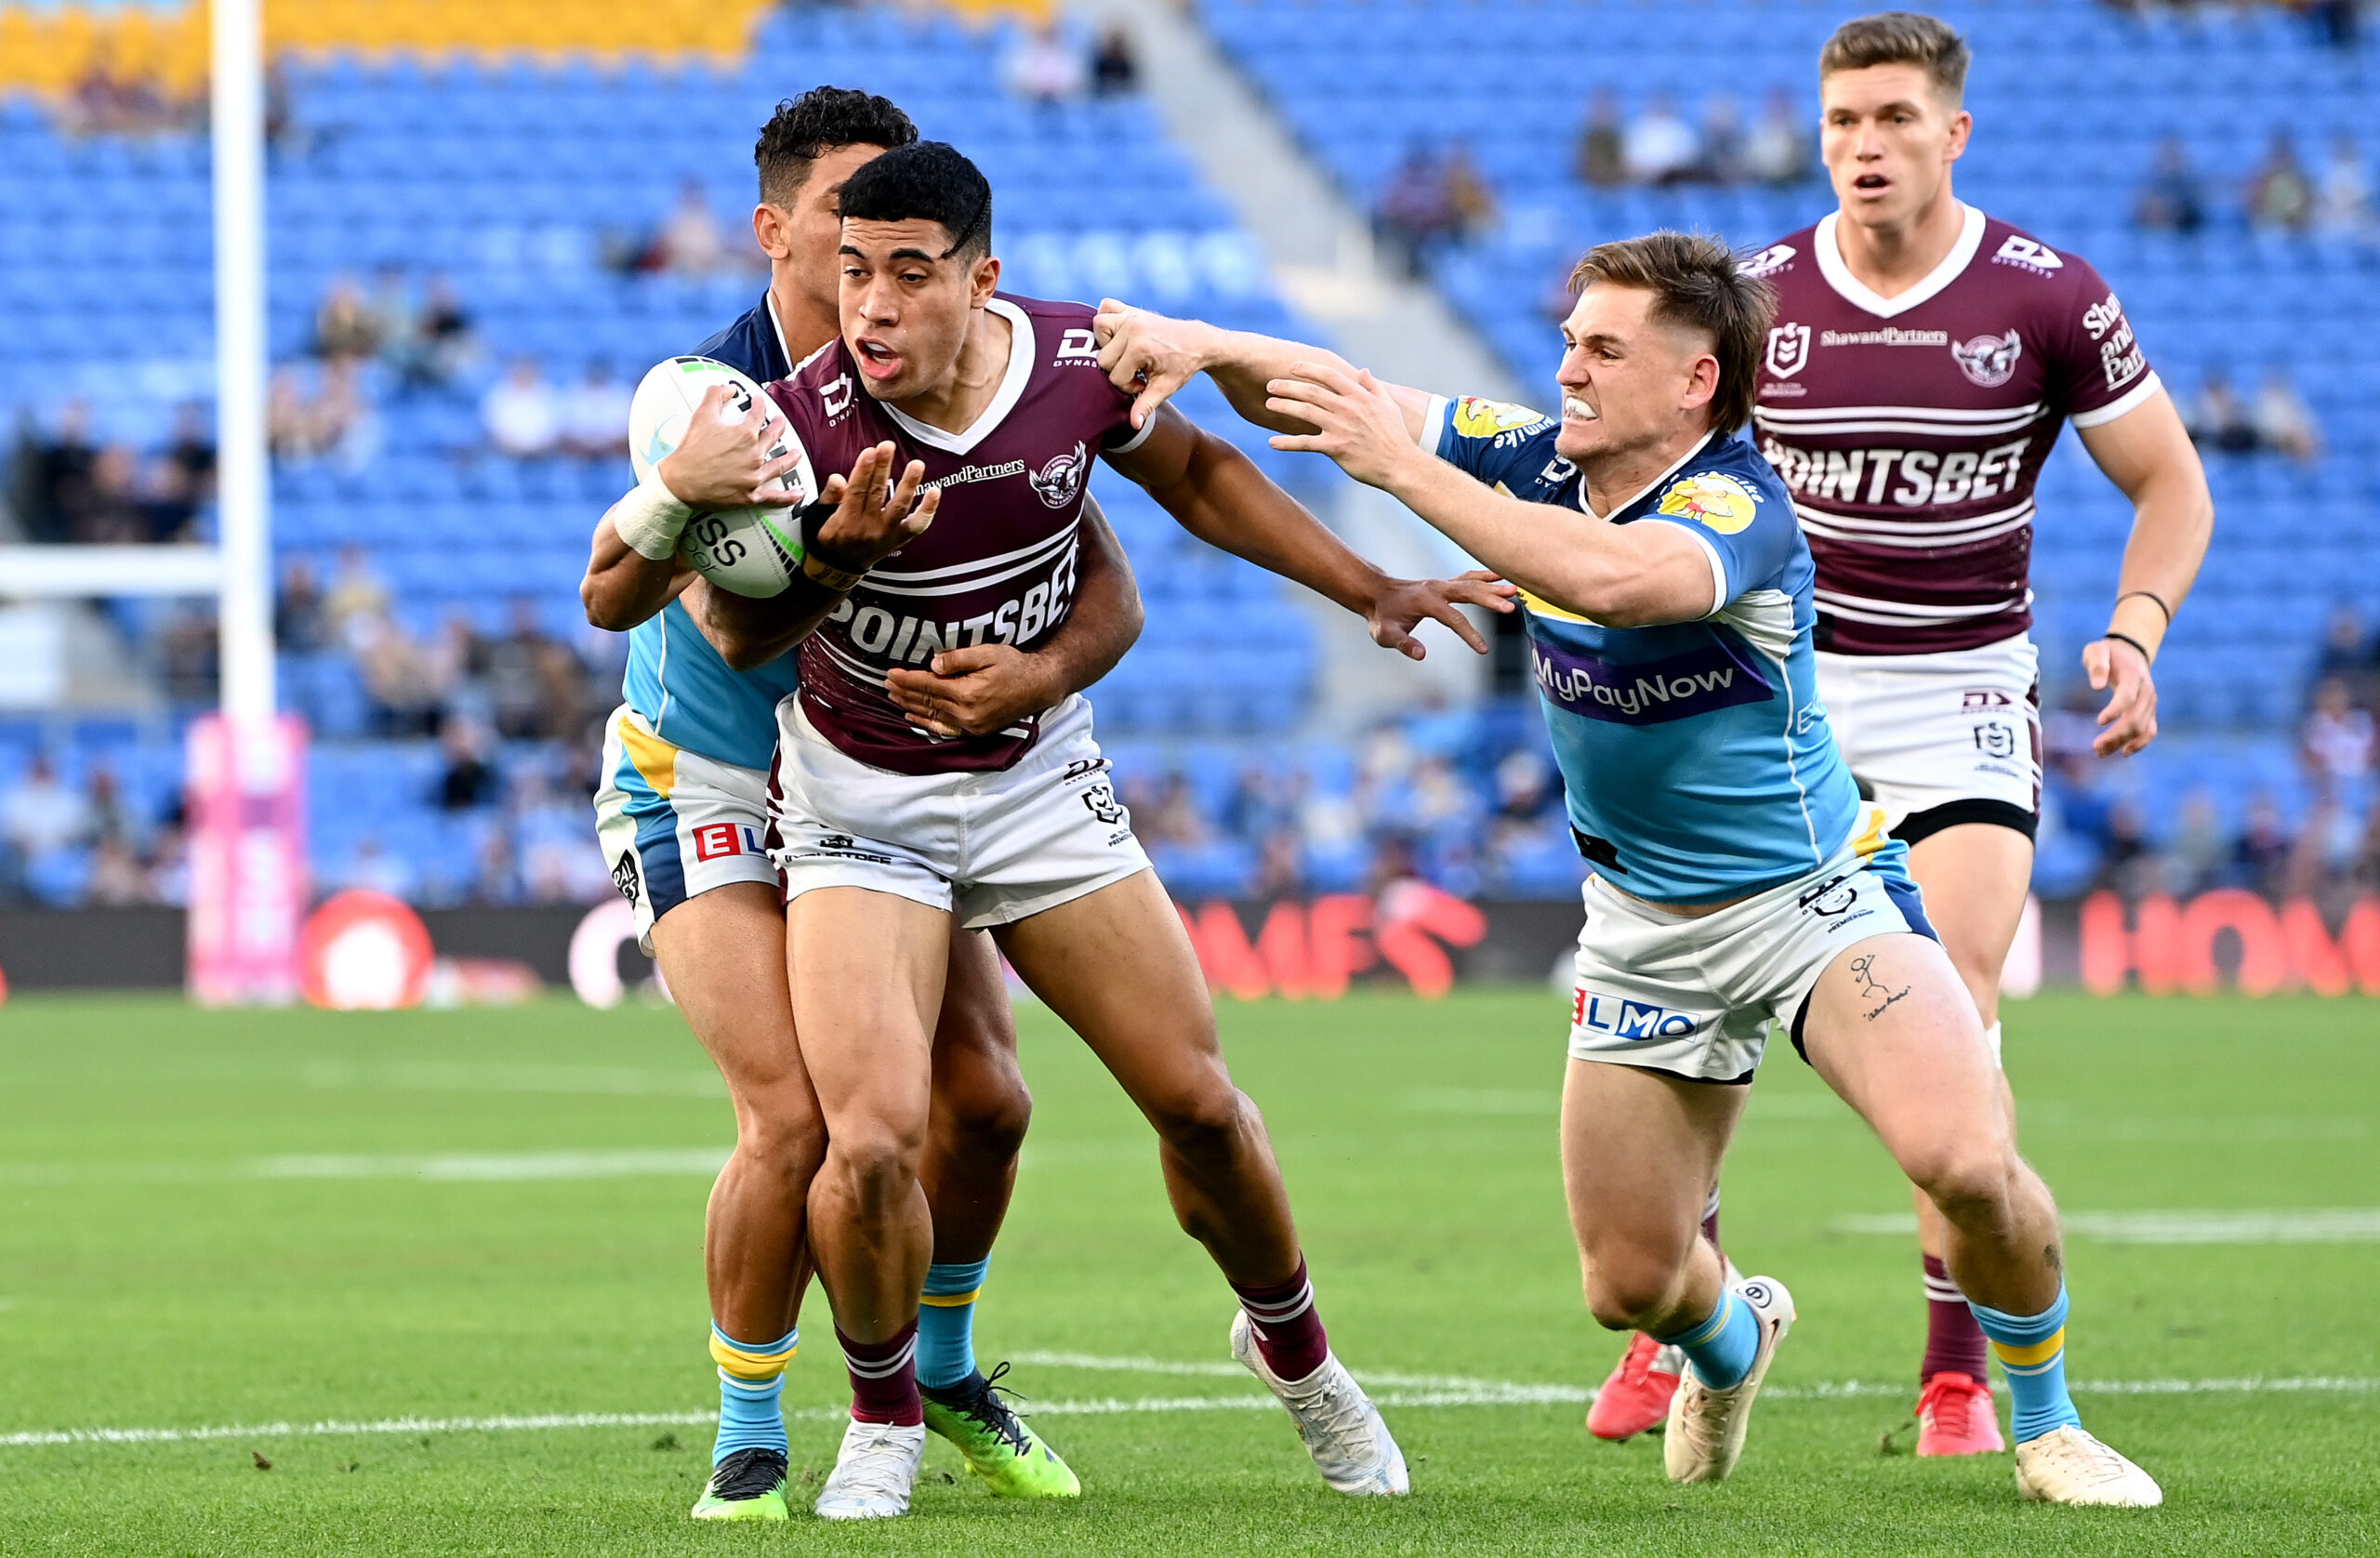 NR:L 2022: Manly Sea Eagles debutant Tolutau Koula following in footsteps  of parents who competed in three Olympics